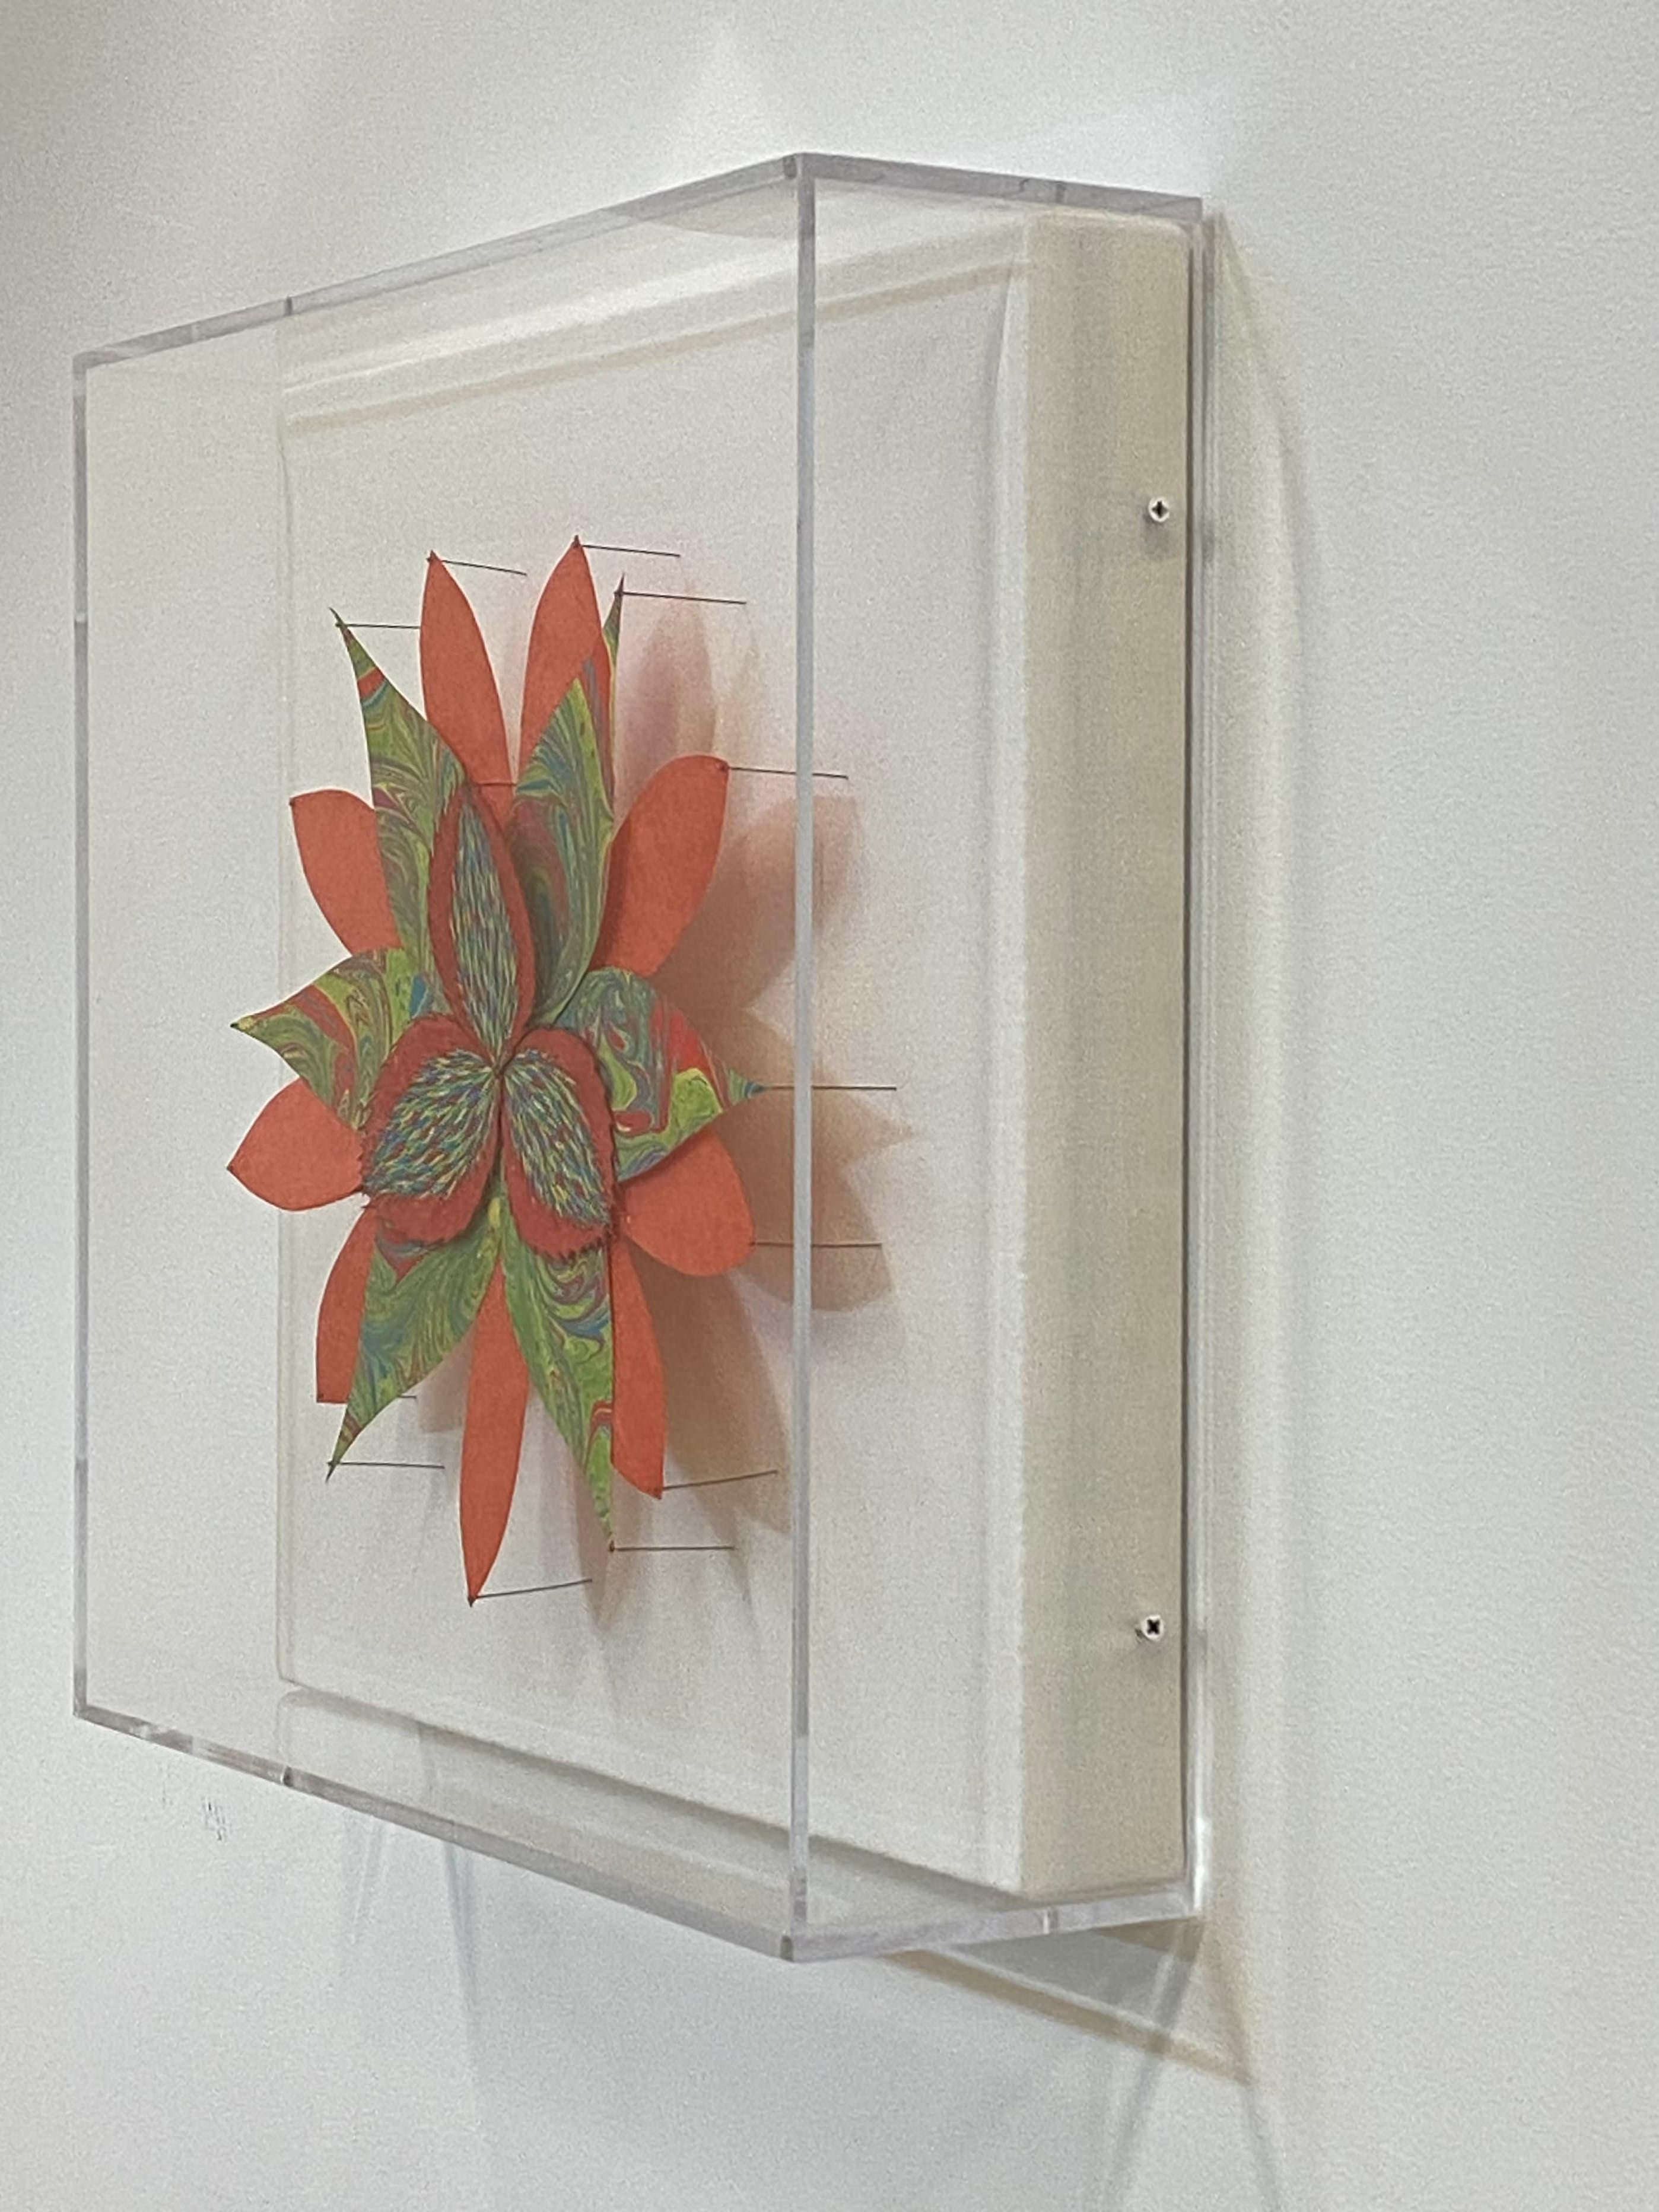 Vermilion Star Flower, Bright Colorful Botanical Paper Wall Sculpture - Gray Abstract Sculpture by Jill Parisi